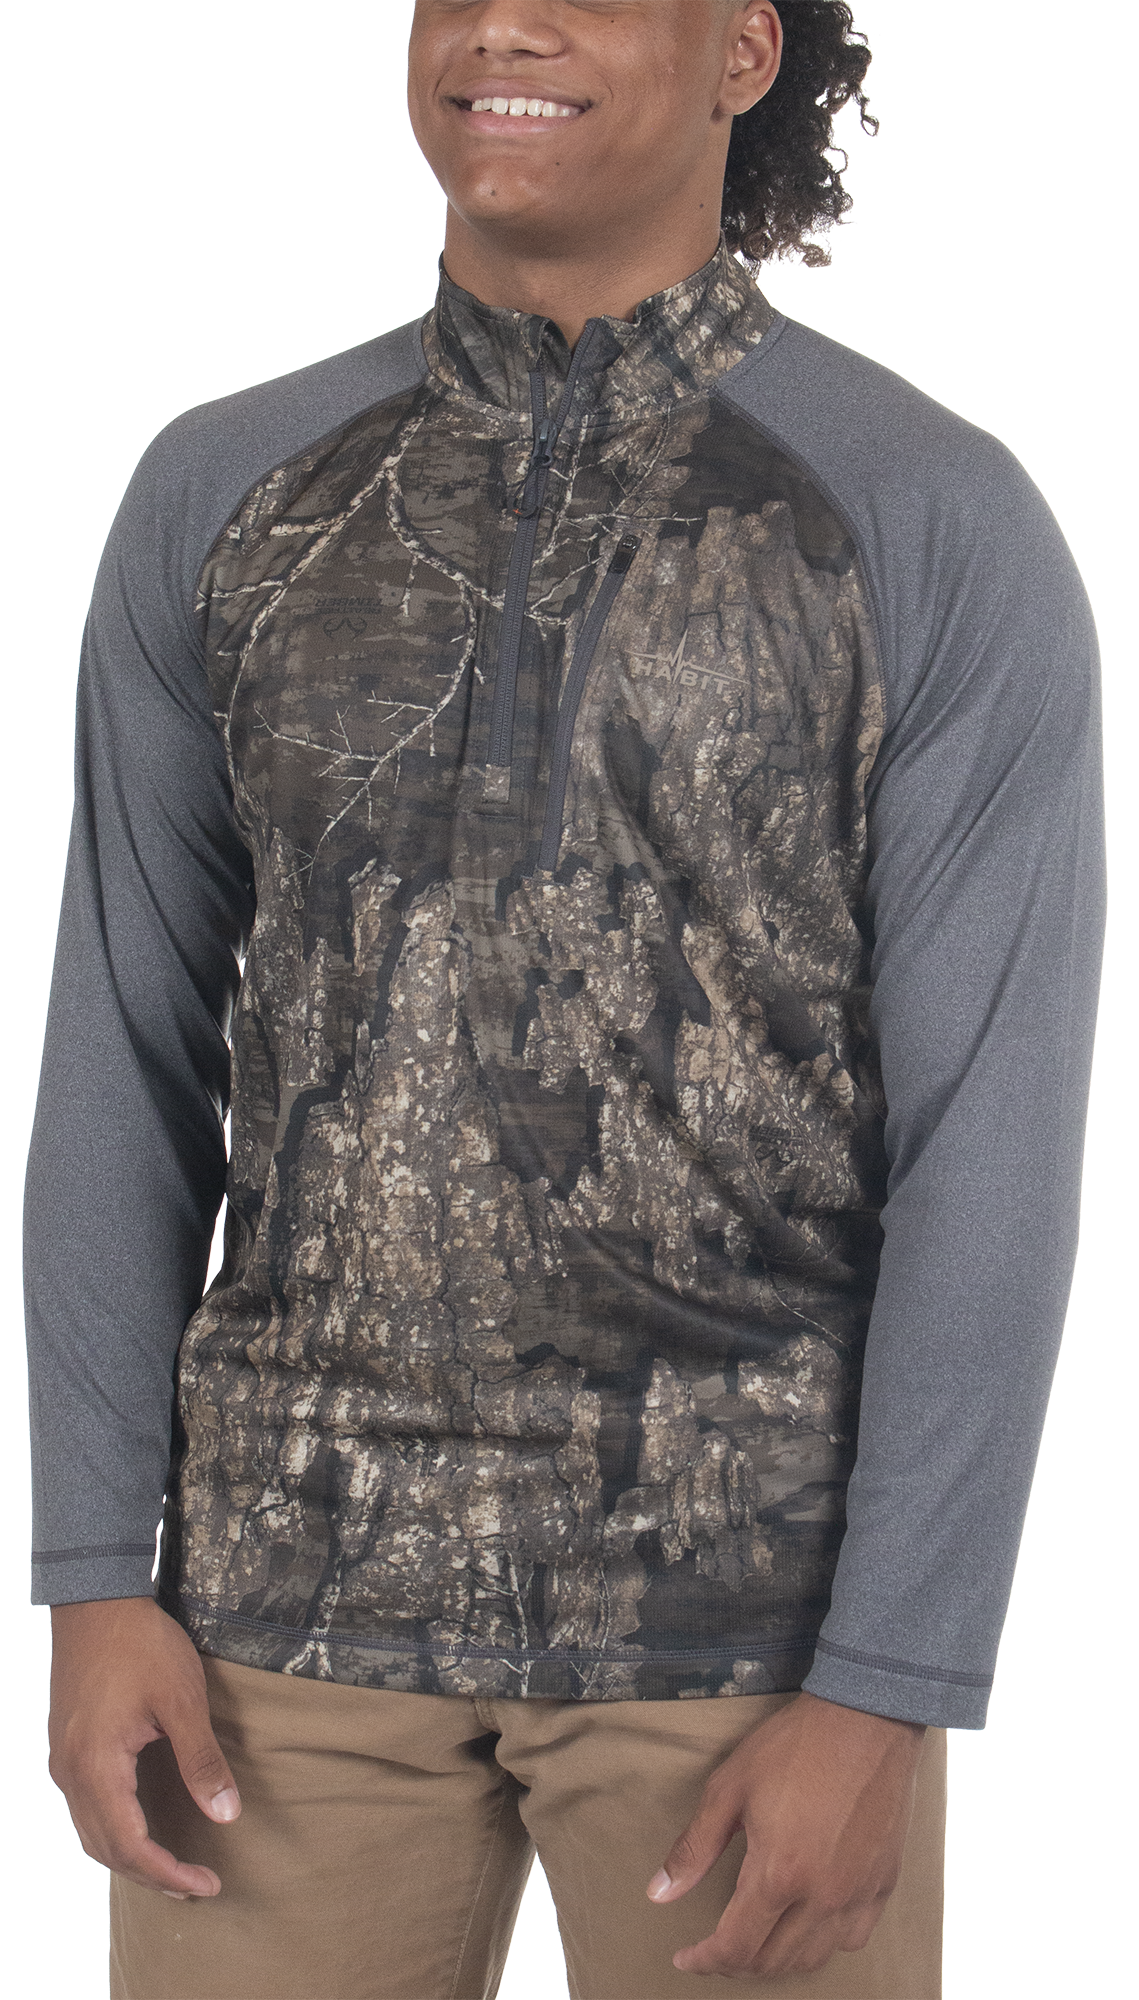 Men's Lewis Lodge 1/3 Zip Performance Layer Realtree Timber Front